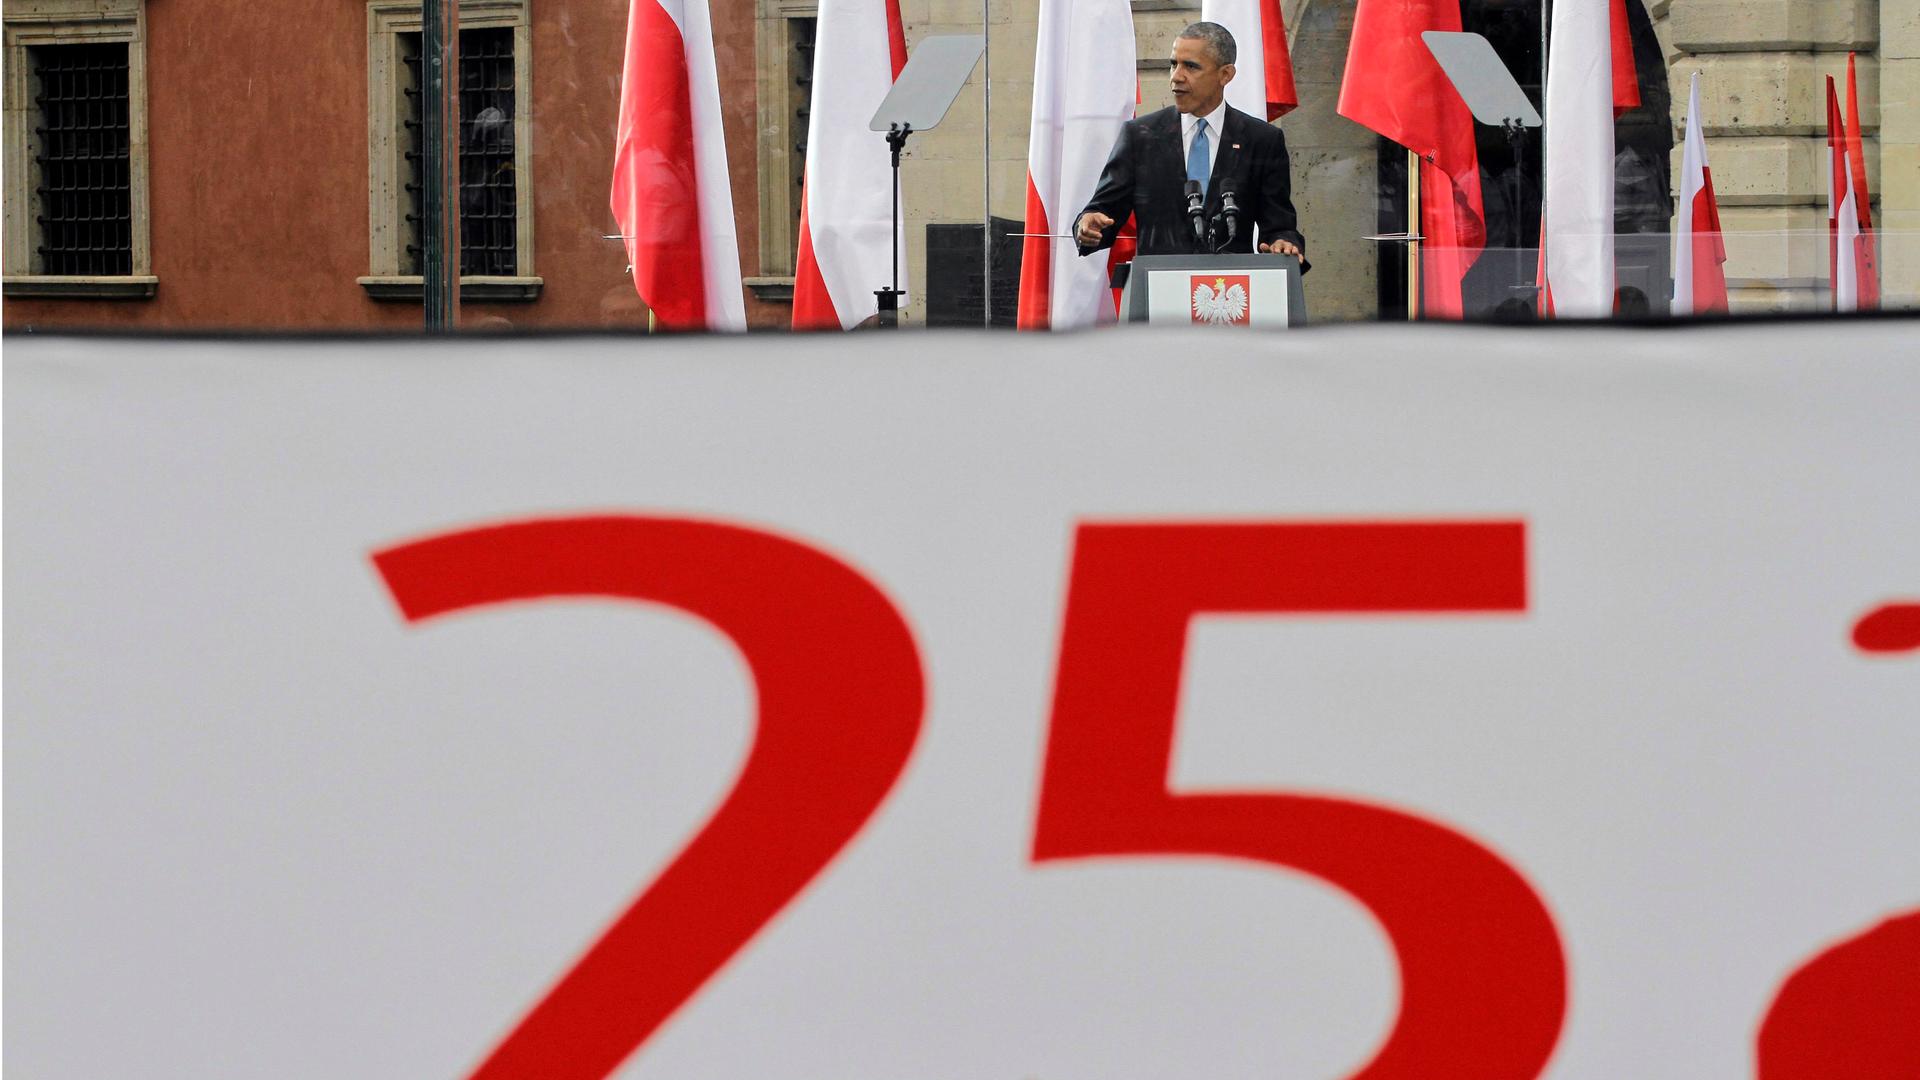 US President Barack Obama speaks during a ceremony marking the "Freedom Day" anniversary in Warsaw's Castle Square June 4, 2014. Obama's visit to Poland coincides with the "Freedom Day" anniversary, marking the holding of the country's first partially-fre